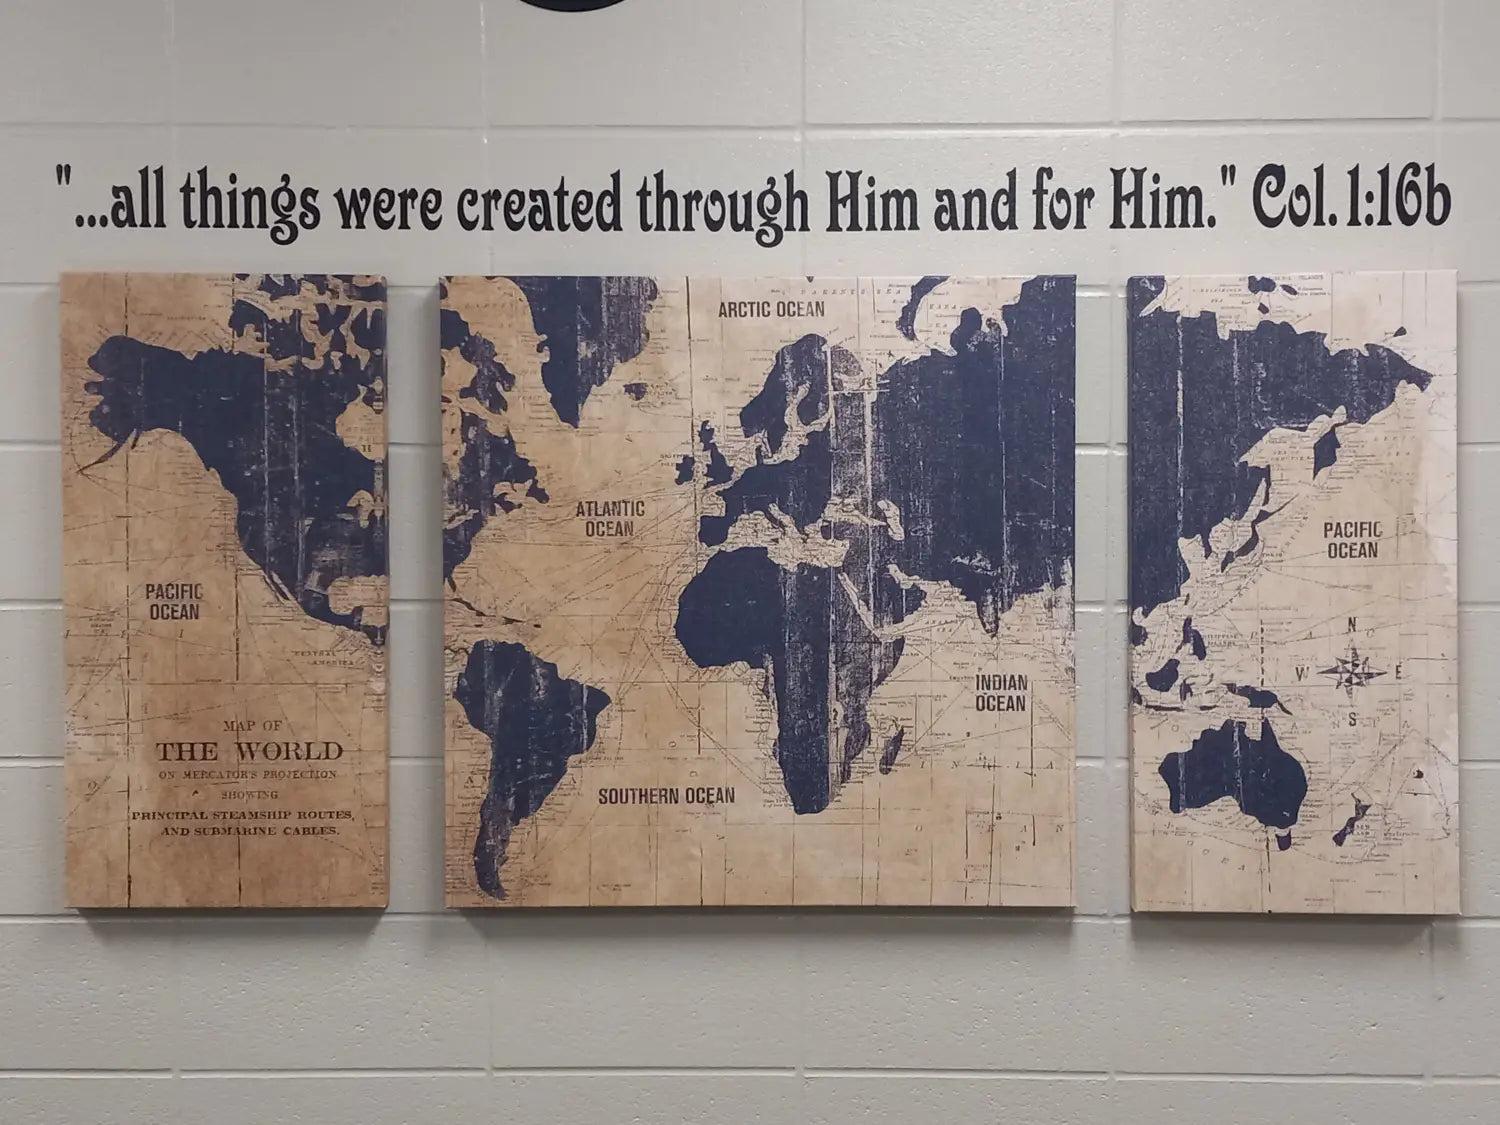 Custom bible verse wall decal display over a world picture that reads ...all things were created through Him and for Him. Col. 1:16b - Created by TheSimpleStencil.com 